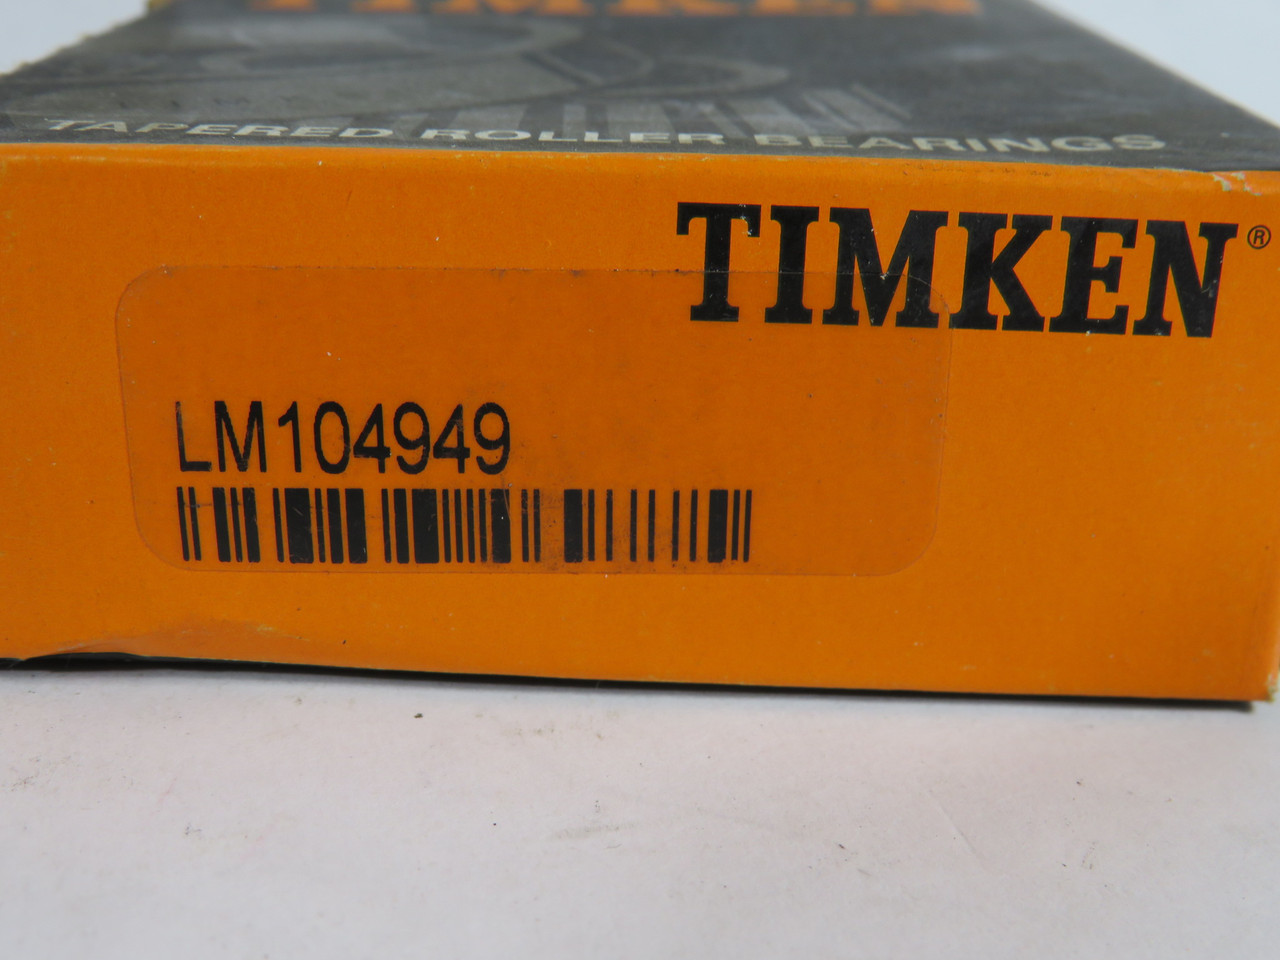 Timken LM104949 Tapered Roller Bearing 2"ID 0.8750"W NEW